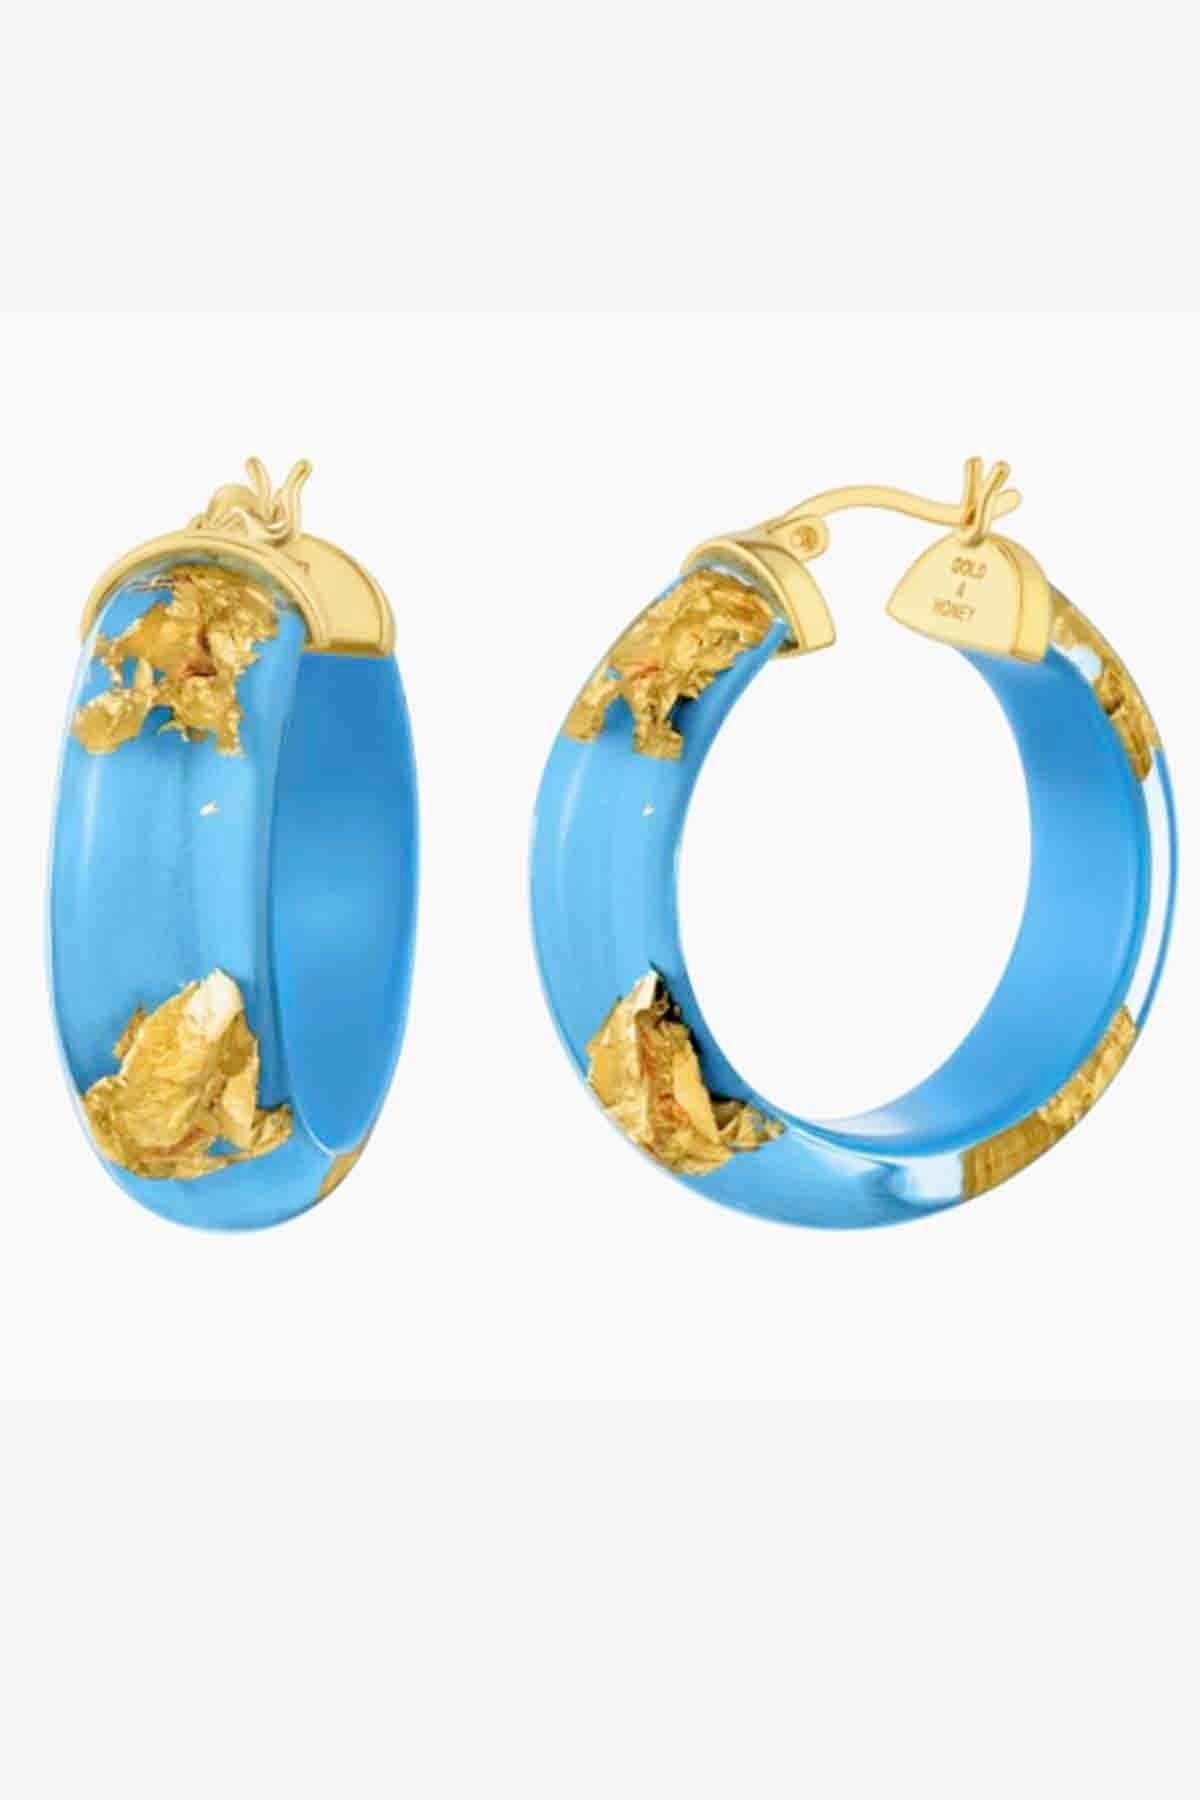 turquoise 1.25" Hoops by Gold and Honey infused with 24K Gold Leaf